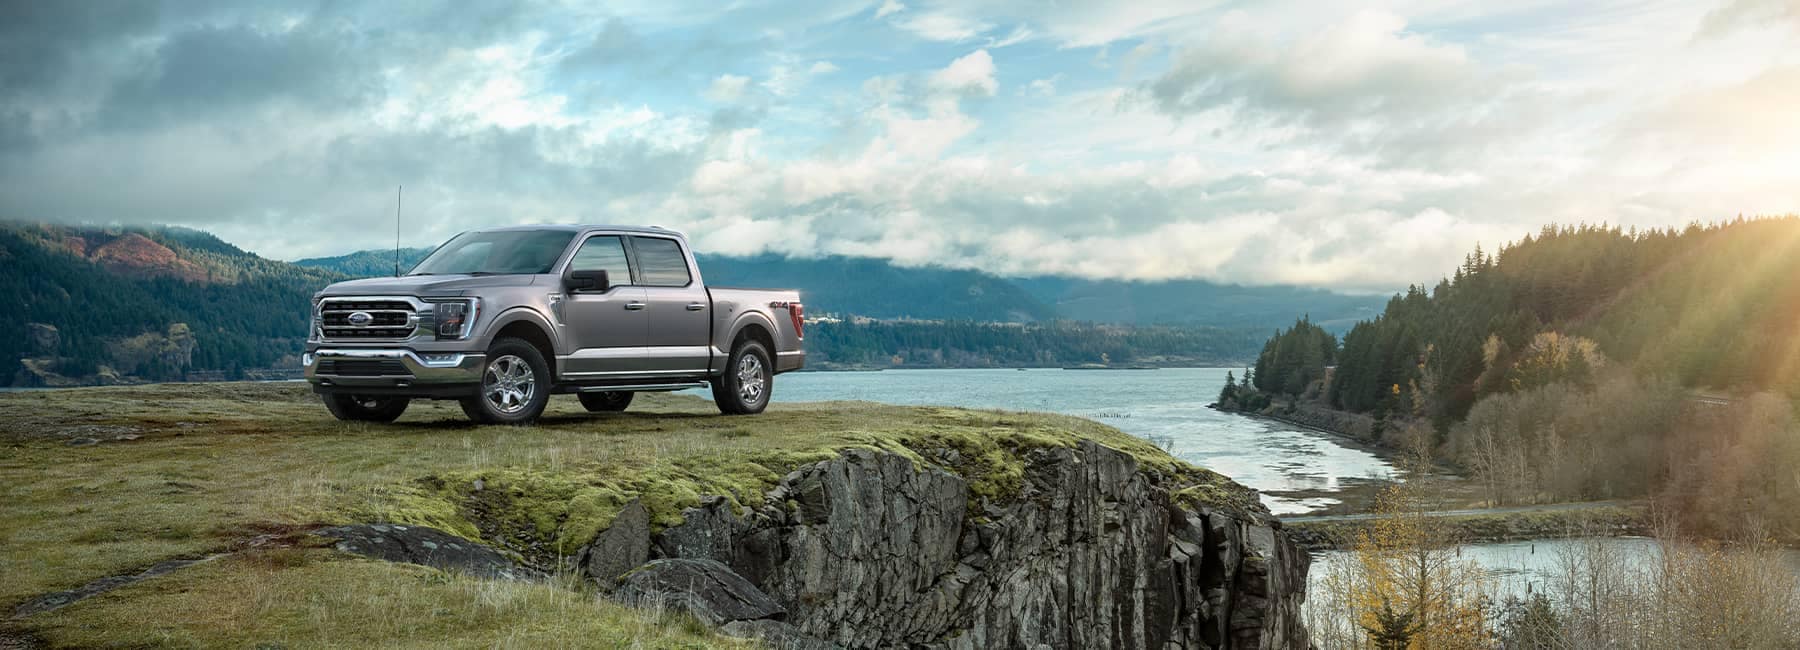 Silver 2021 Ford F-150 parked on a cliff overlooking a river